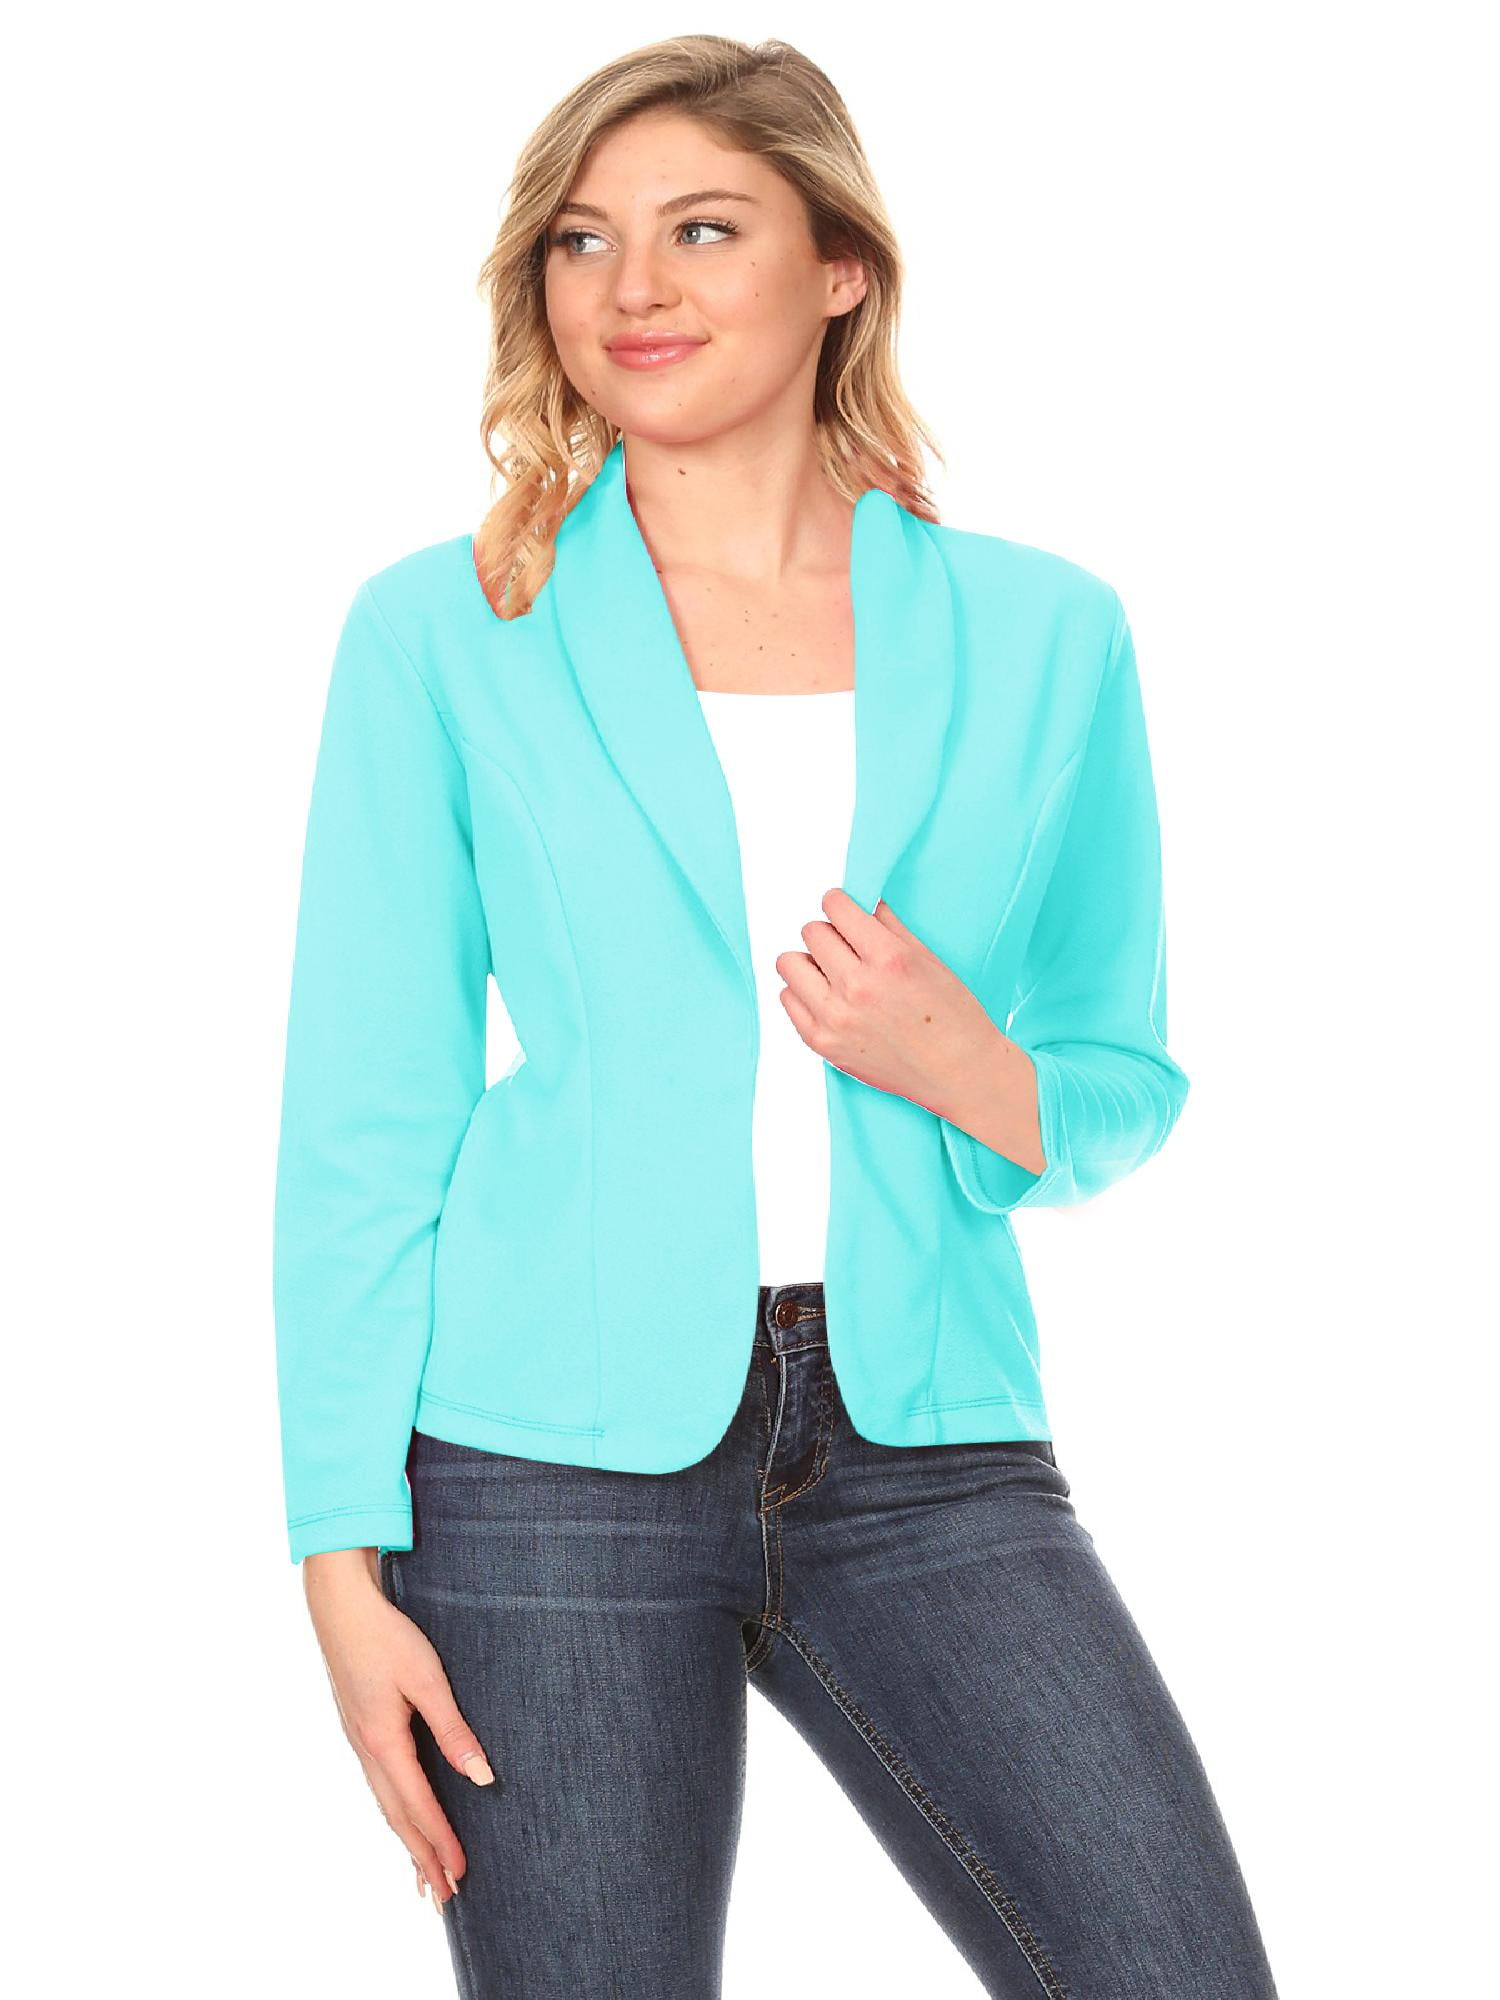 Moa Collection - Women&amp;#39;s Solid Casual Office Work Long Sleeve Open Front Blazer Jacket Made in USA S-3XL